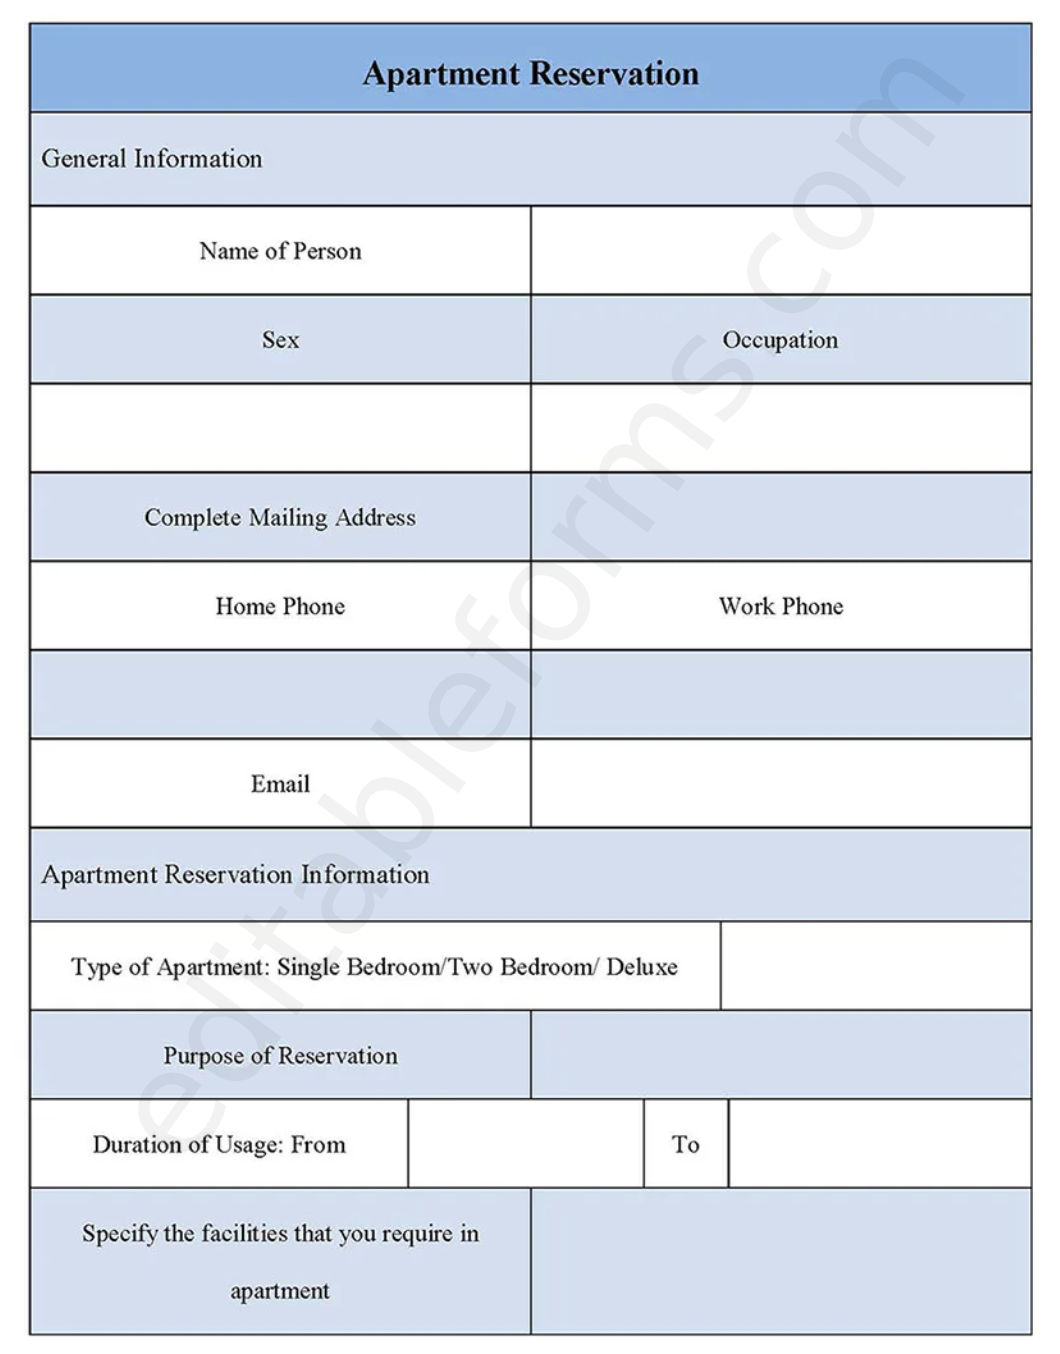 Apartment Reservation Fillable PDF Template